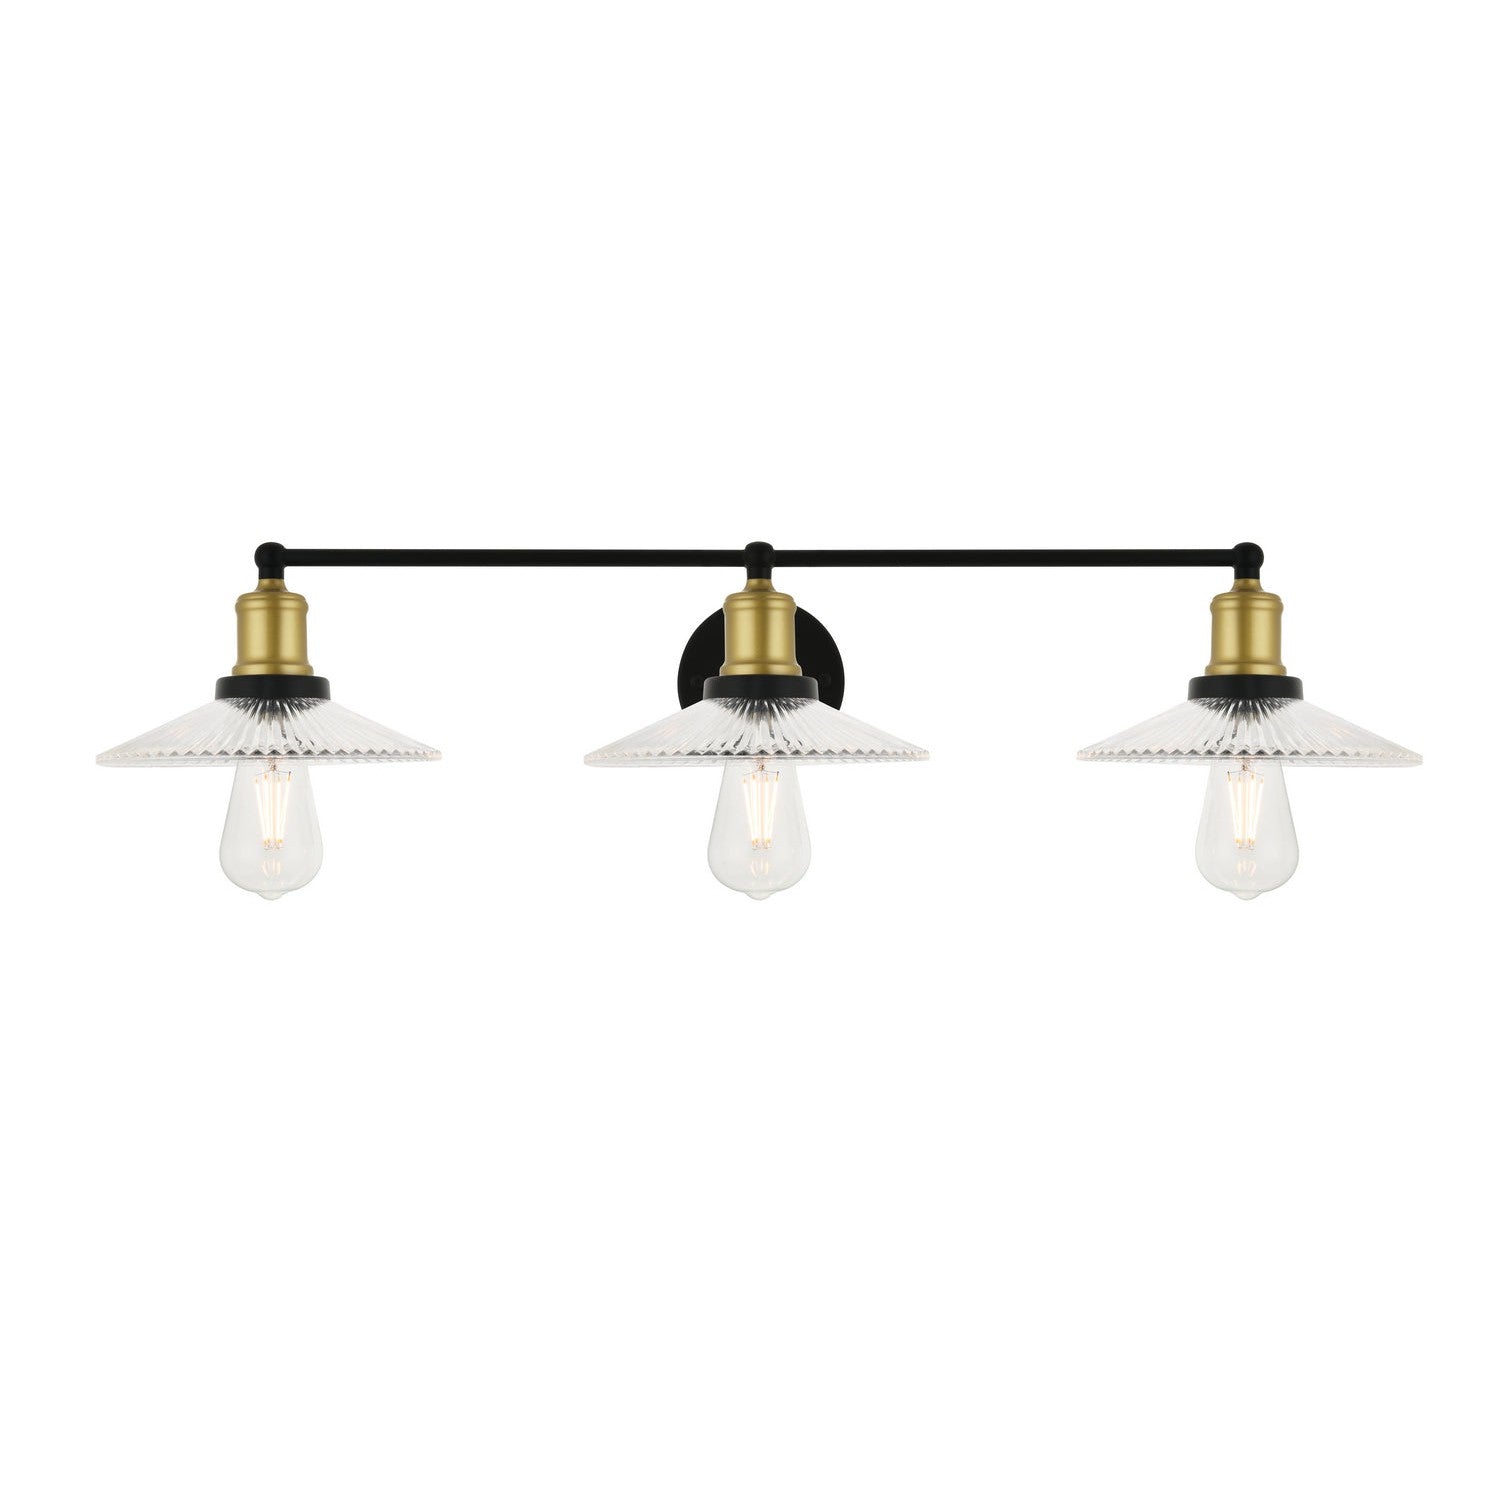 Elegant Waltz LD4040W33BRB Bath Vanity Light 33 in. wide - Brass And Black And Clear